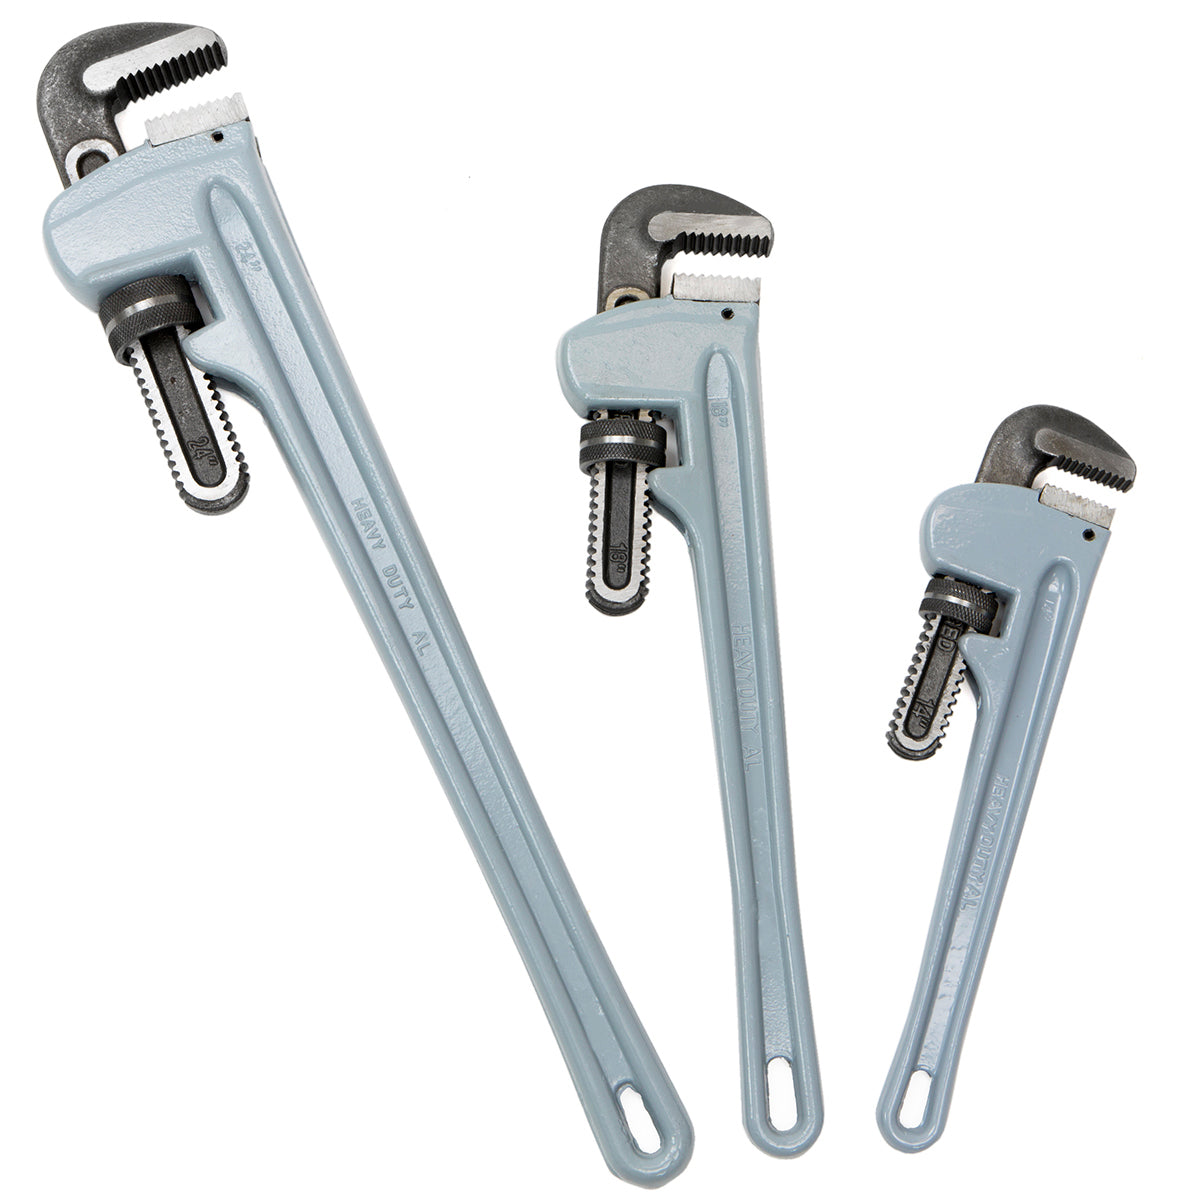 Aluminum Pipe Wrench 3-Pieces Adjustable Jaw 14, 18, 24 Heavy